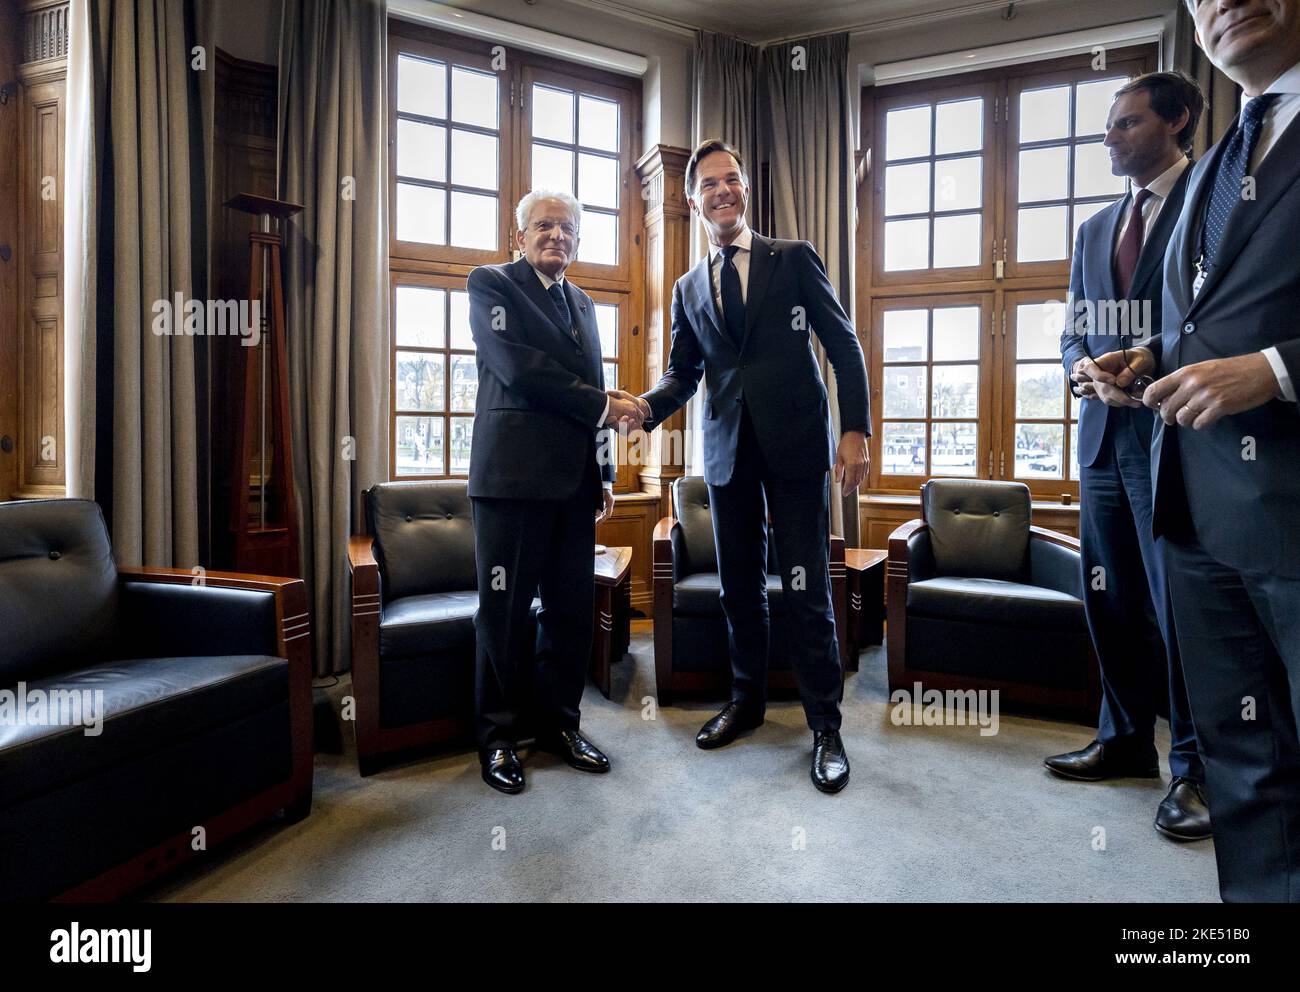 2022-11-10 13:06:09 Dutch Prime Minister Mark Rutte (R) meets Italian President Sergio Mattarella in his office (the Torentje) in The Hague, The Netherlands, November 10, 2022. The Italian president is paying a three-day state visit to the Netherlands. ANP REMKO DE WAAL netherlands out - belgium out Stock Photo